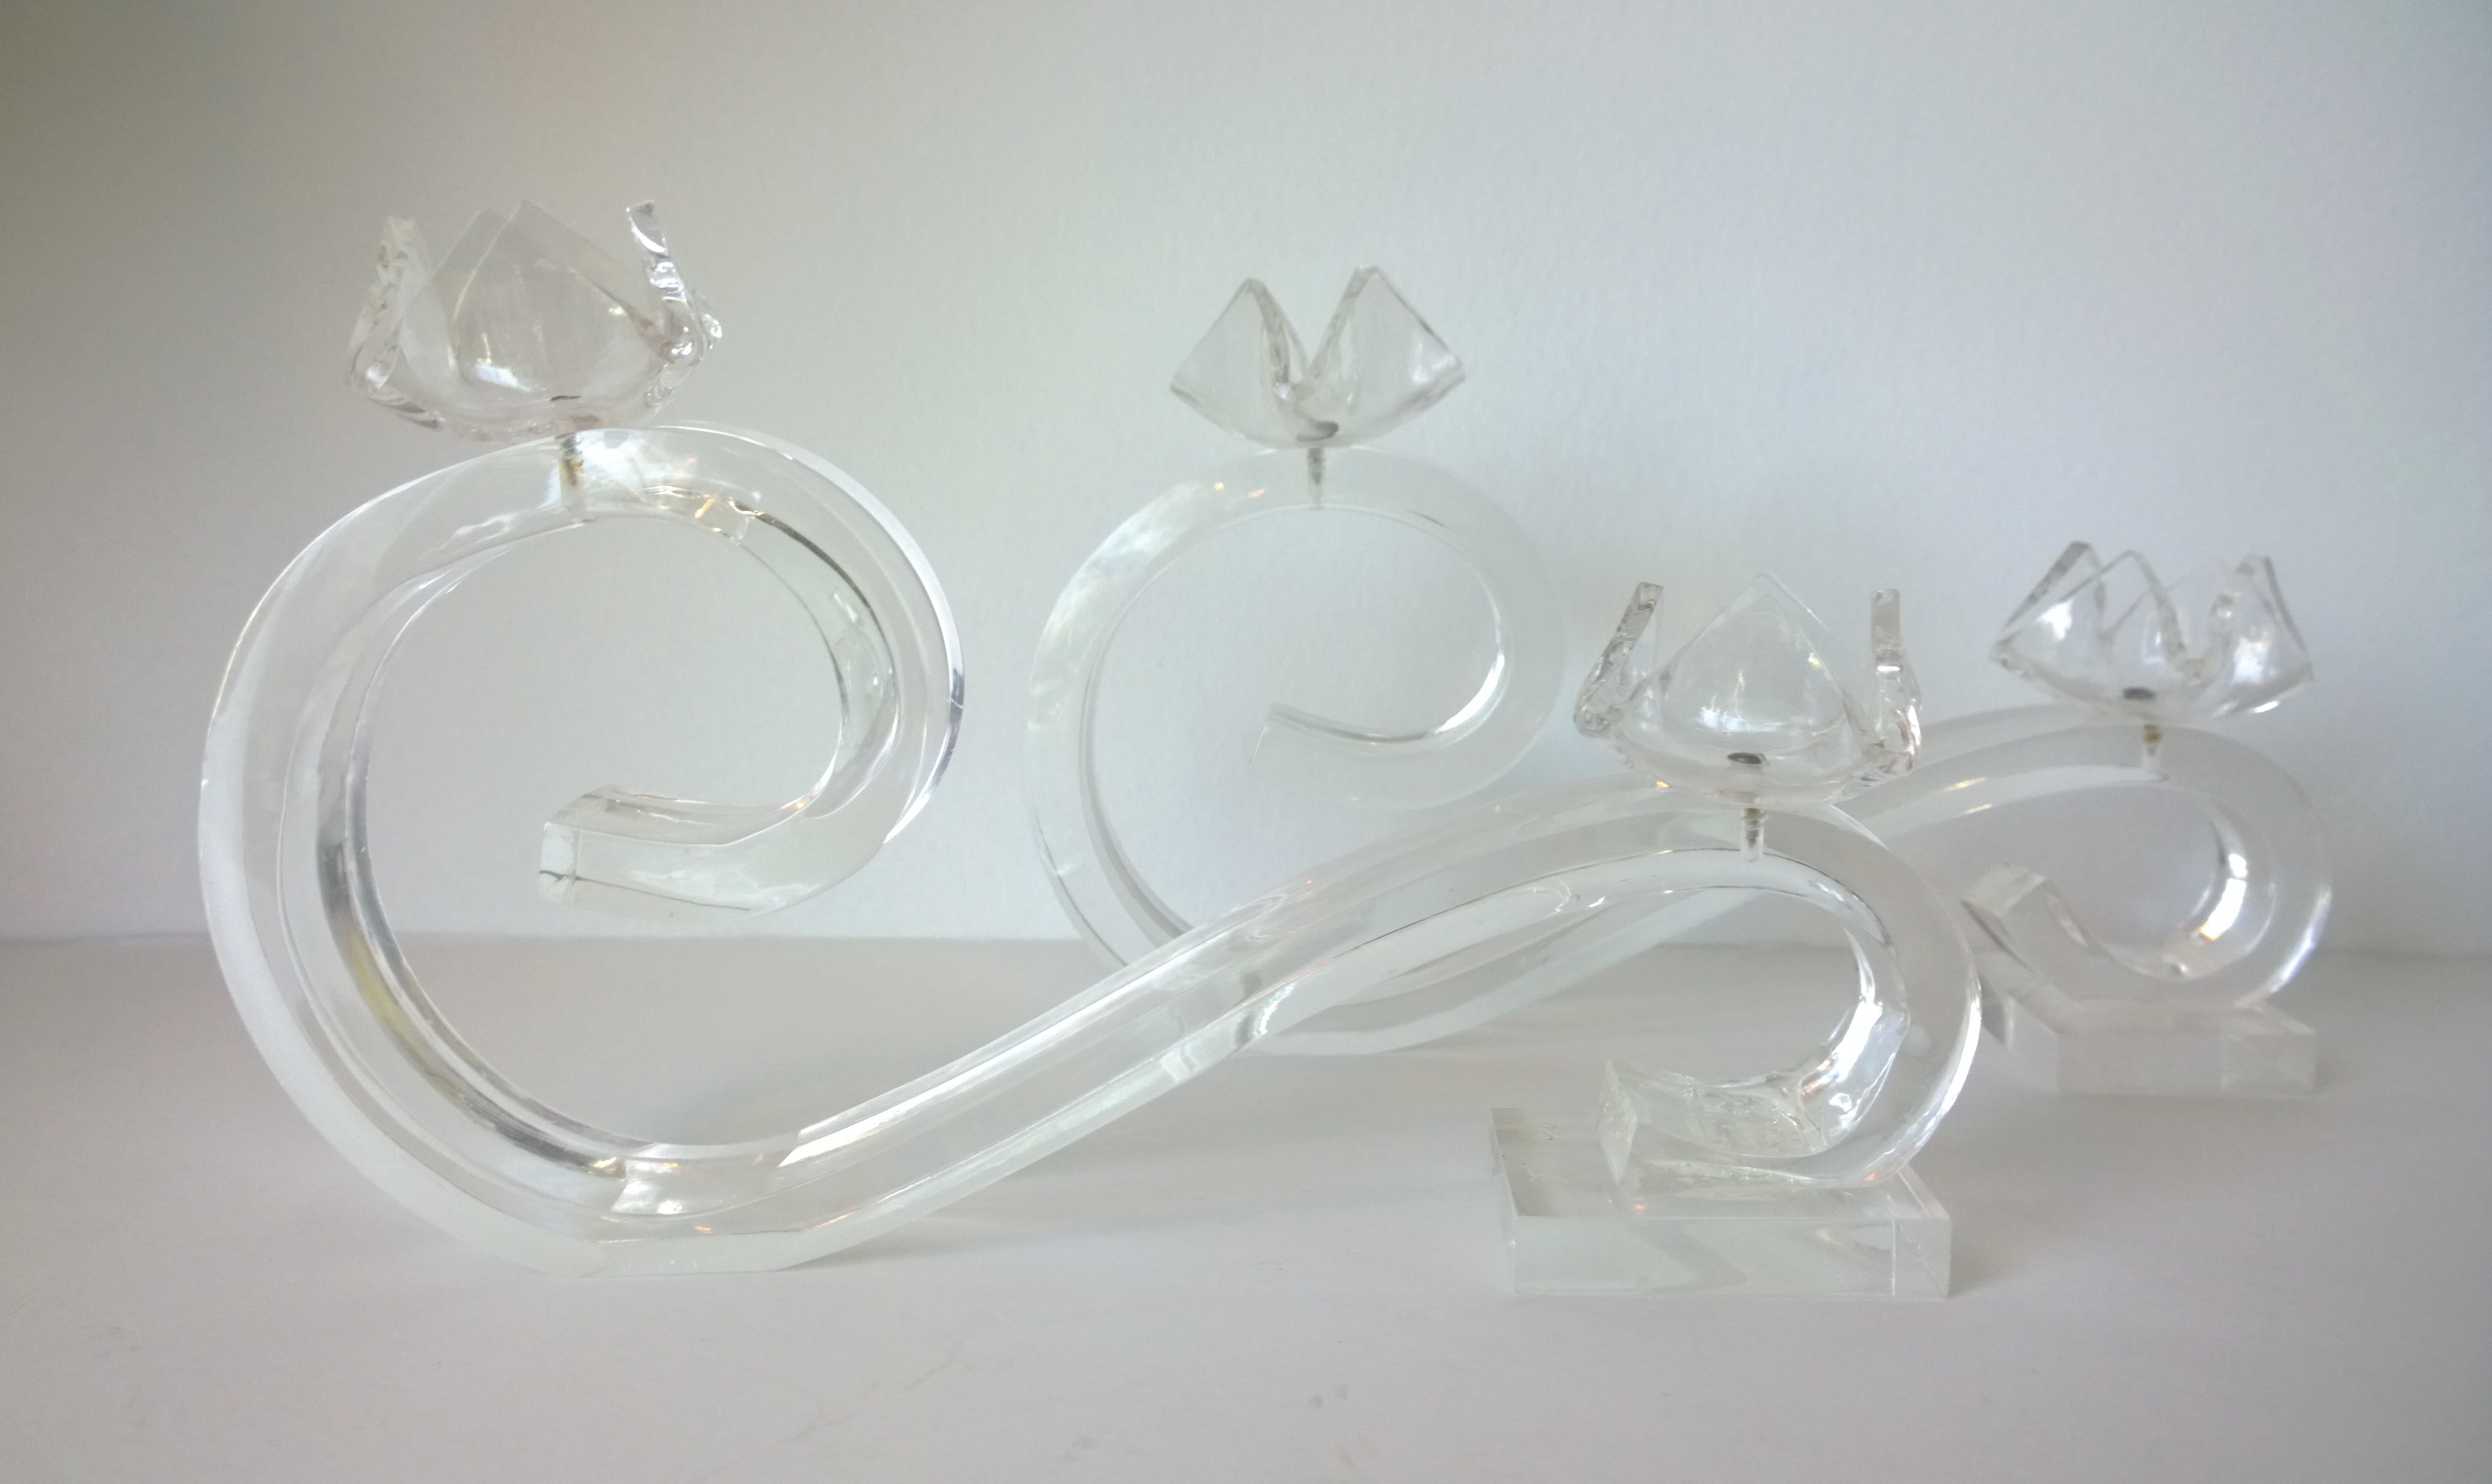 Pair of Van Teal Hollywood Glam Scrolled Lucite Two-Light Candlestick Holders In Good Condition For Sale In Houston, TX